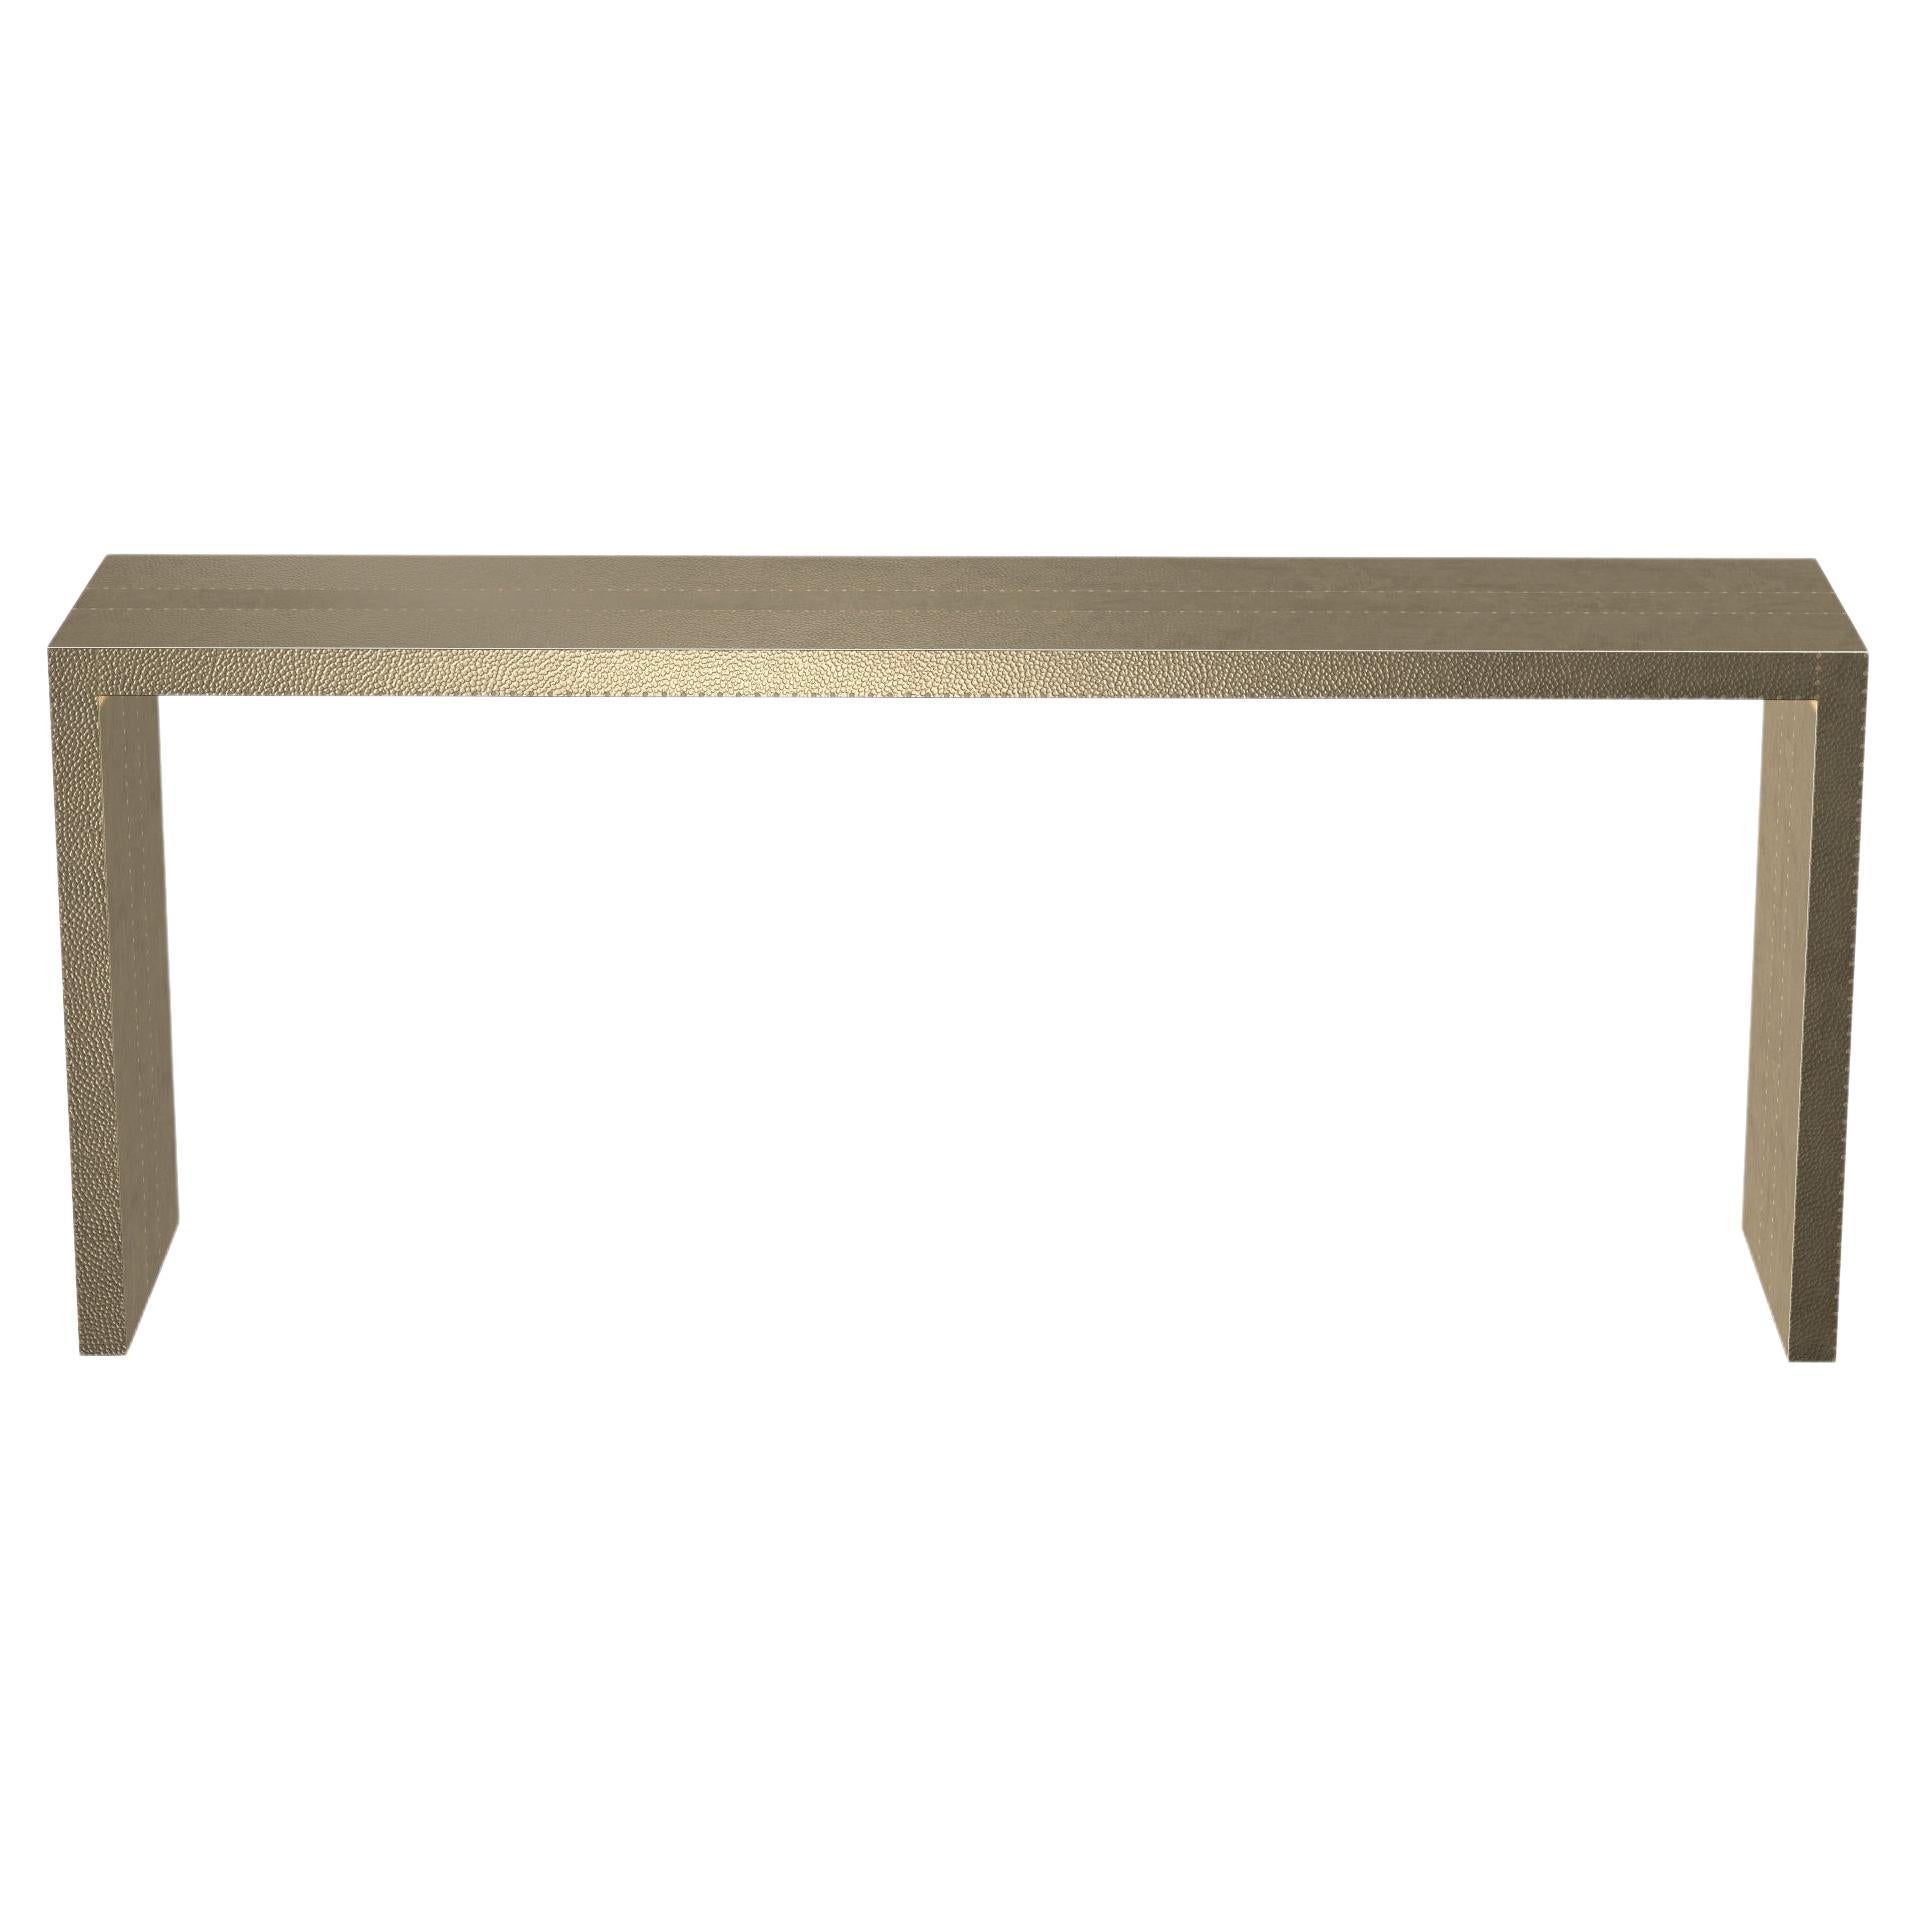 Art Deco Industrial and Work Console Tables Mid. Hammered in Brass  by Alison S For Sale